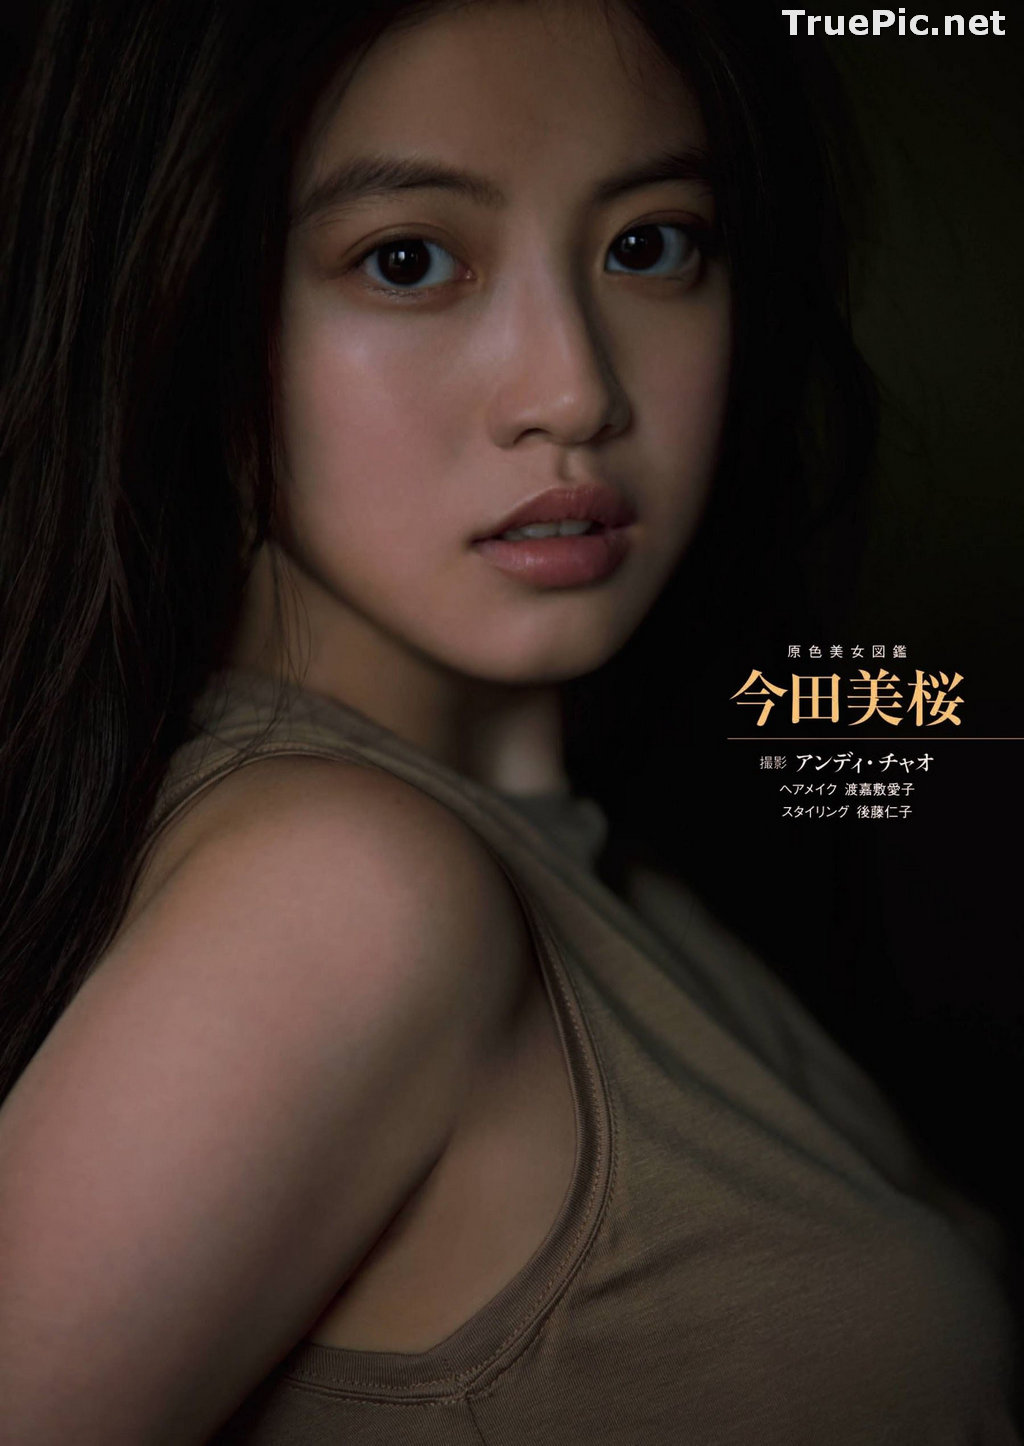 Image Japanese Actress and Model - Mio Imada (今田美櫻) - Sexy Picture Collection 2020 - TruePic.net - Picture-142